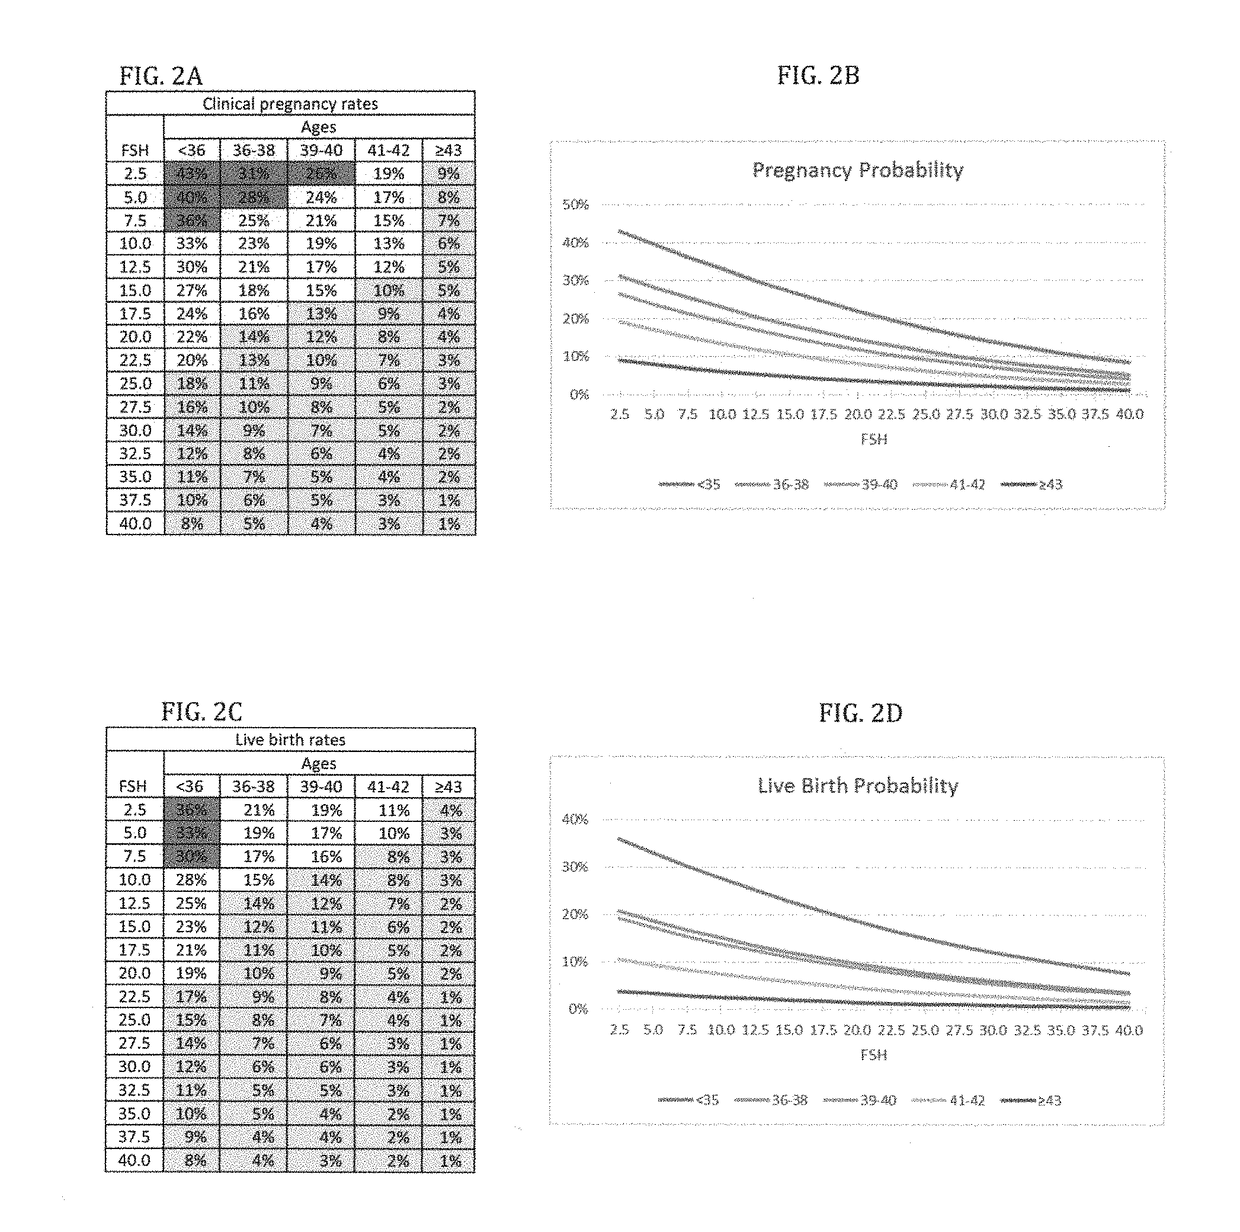 Diagnosis, and anti-mullerian hormone (AMH) administration for treatment, of infertility for good-, intermediate- and poor-prognosis patients for in vitro fertilization in view of logistic regression models